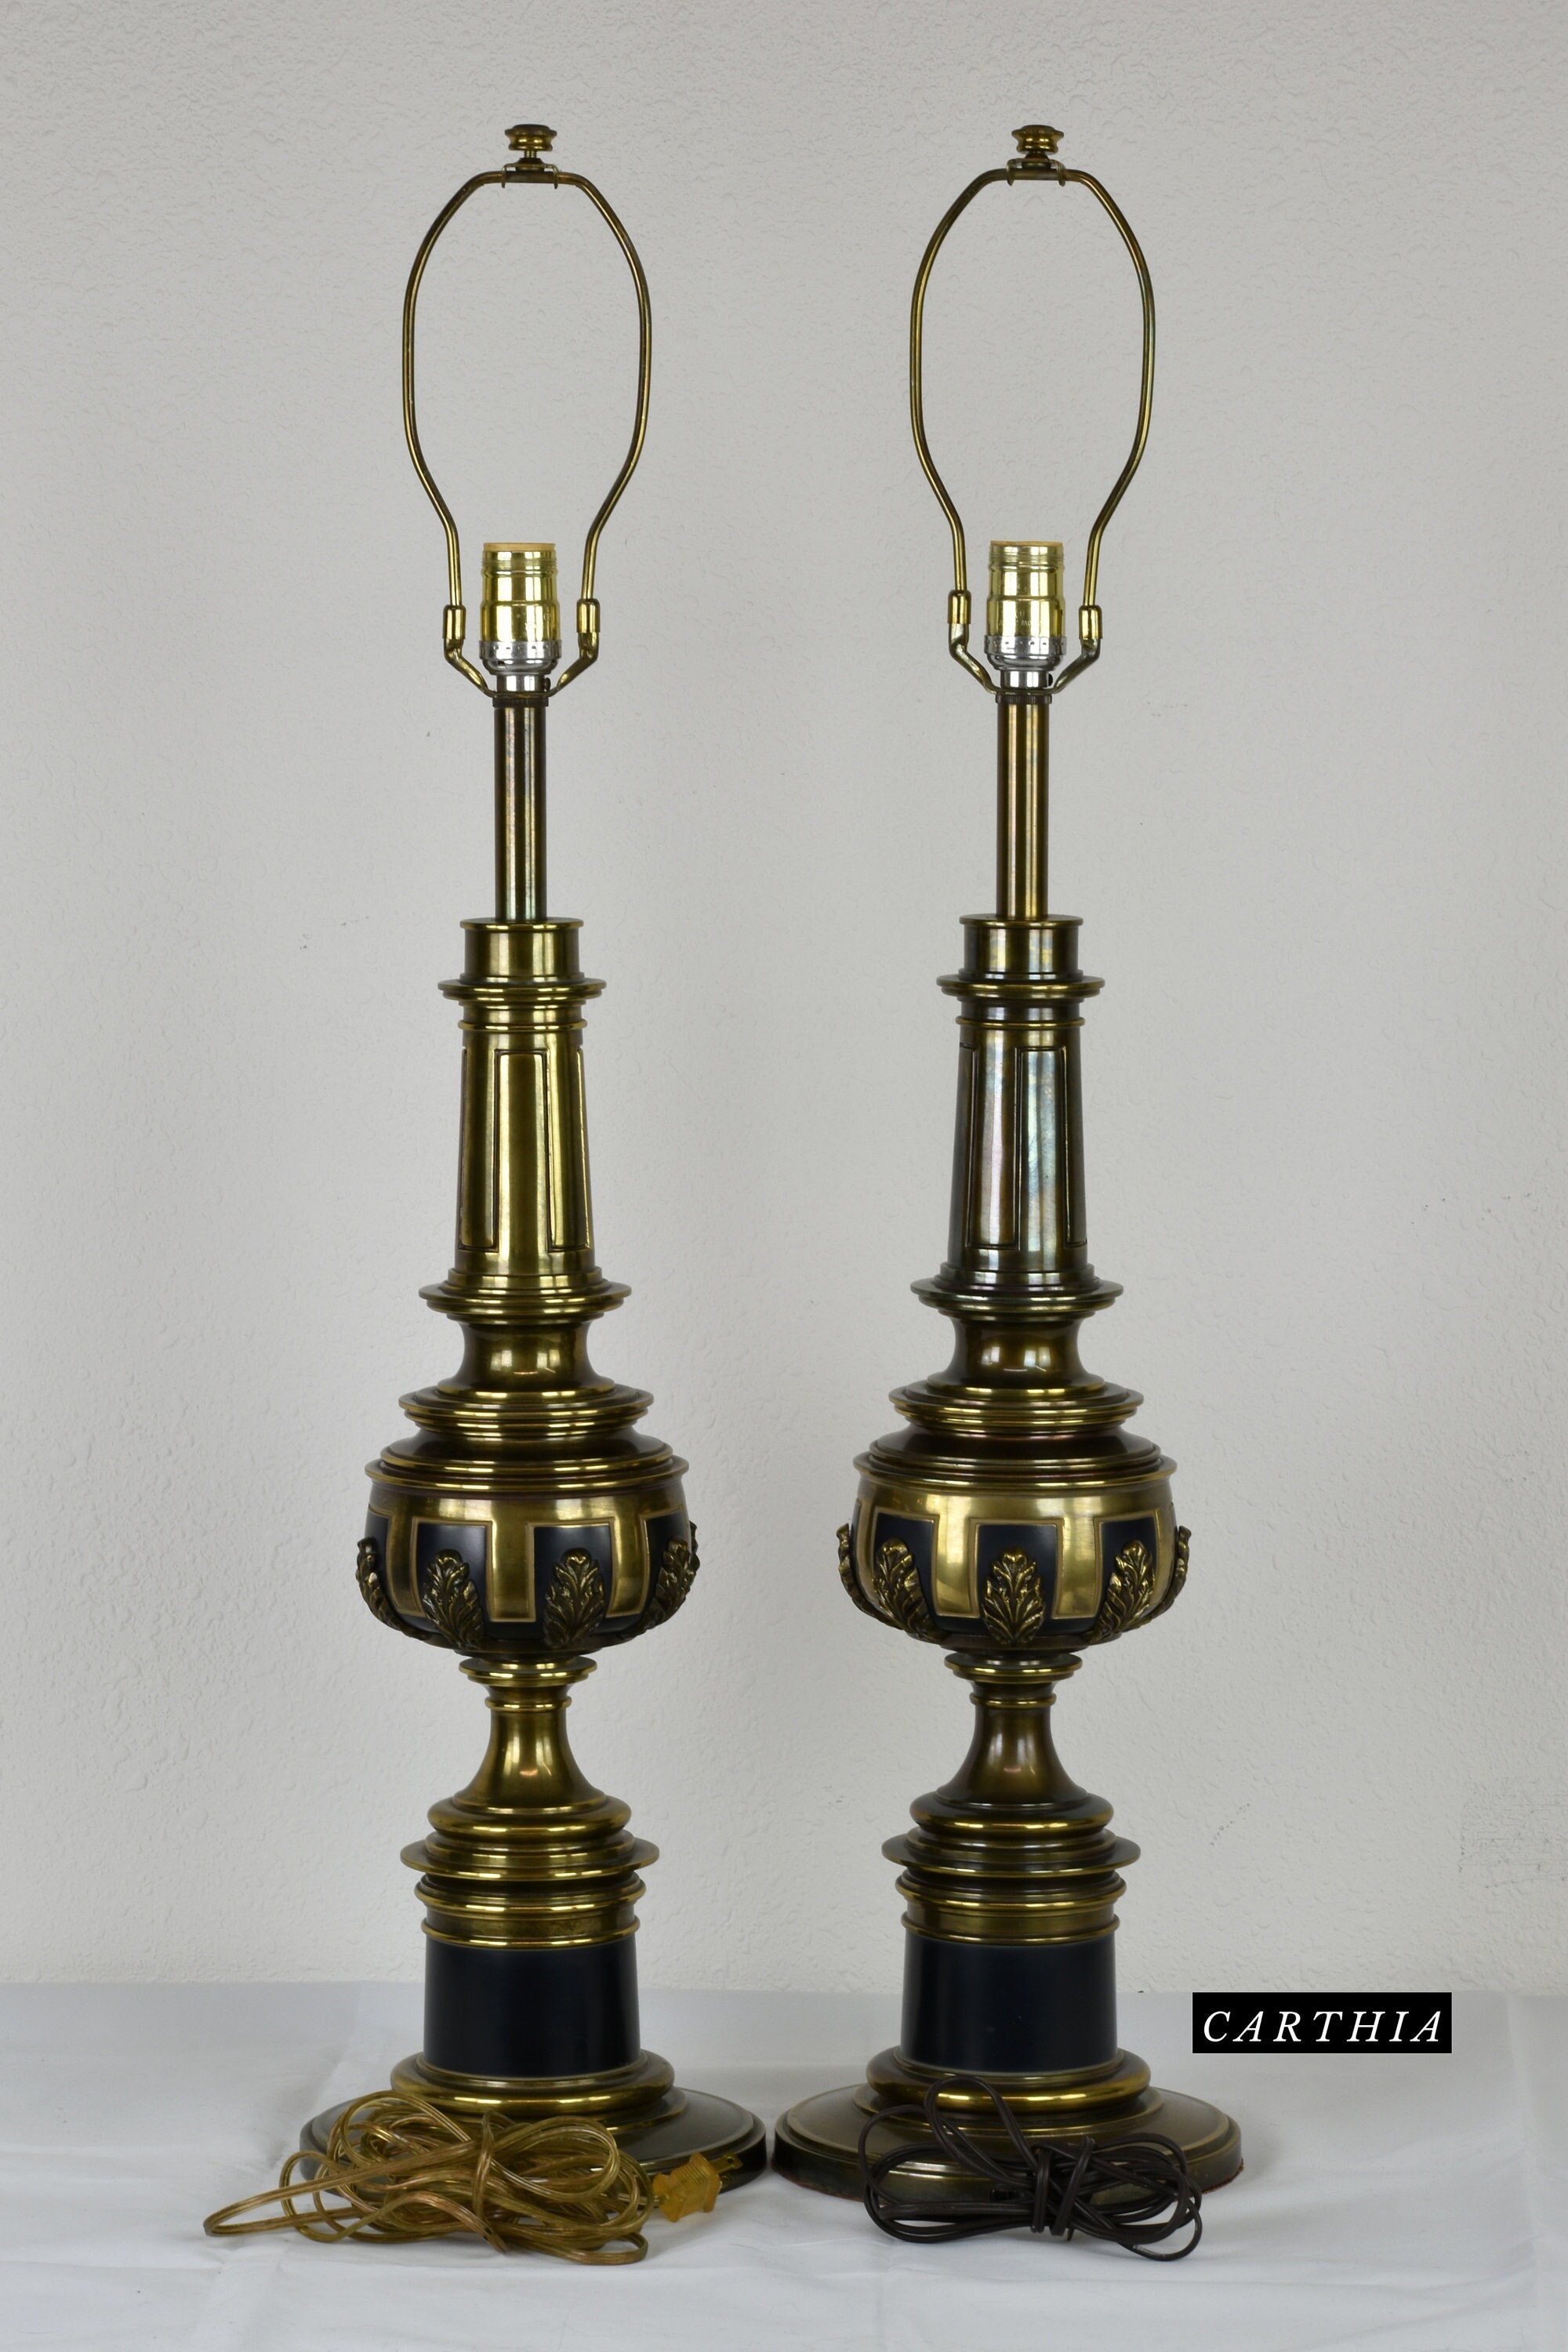 Vintage Mini Solid Brass Bedside Lamps by Stiffel - a Pair